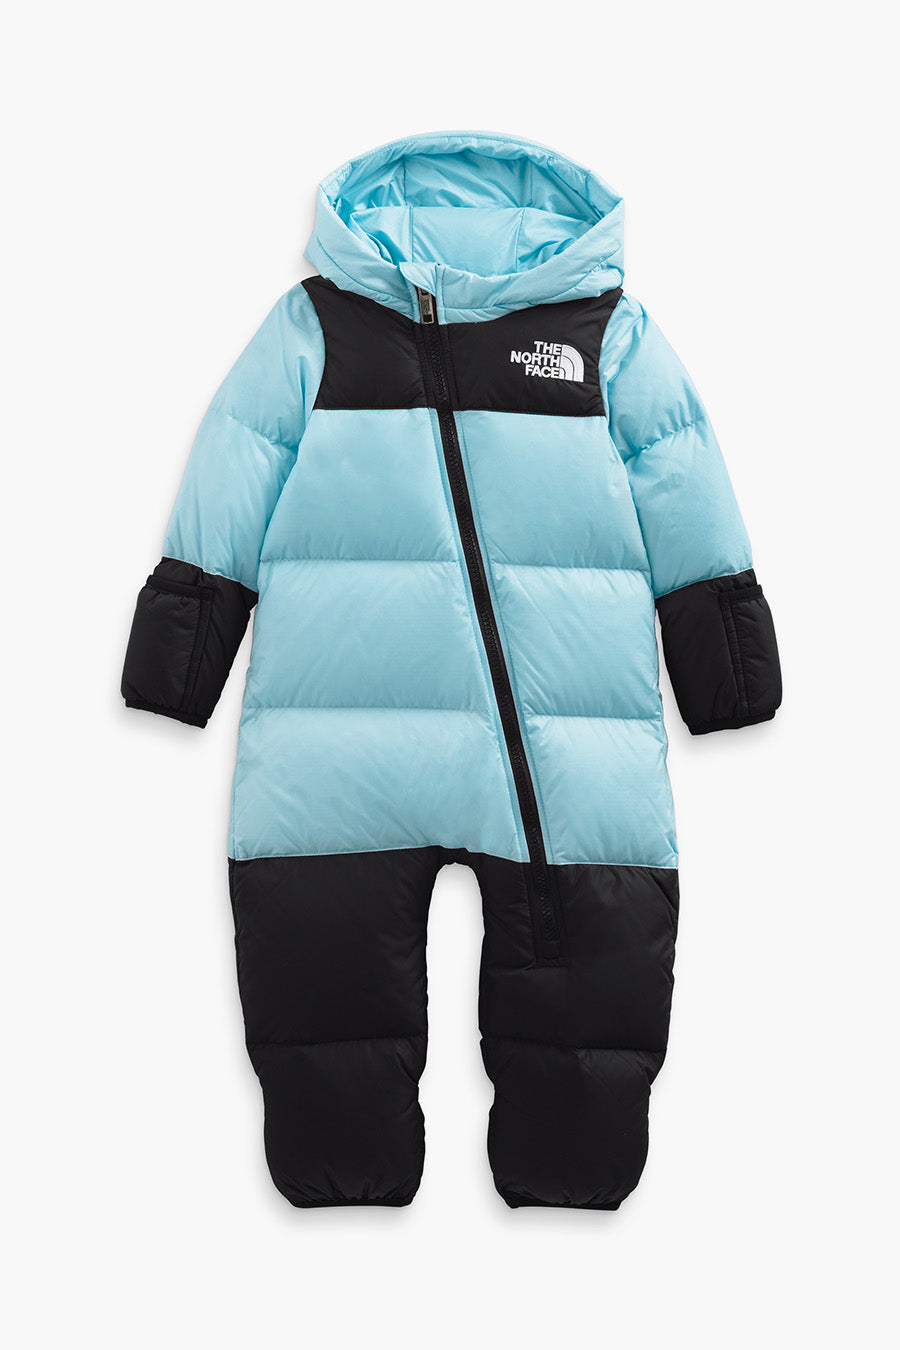 The North Face Lil' Snuggler Down Suit - Infants